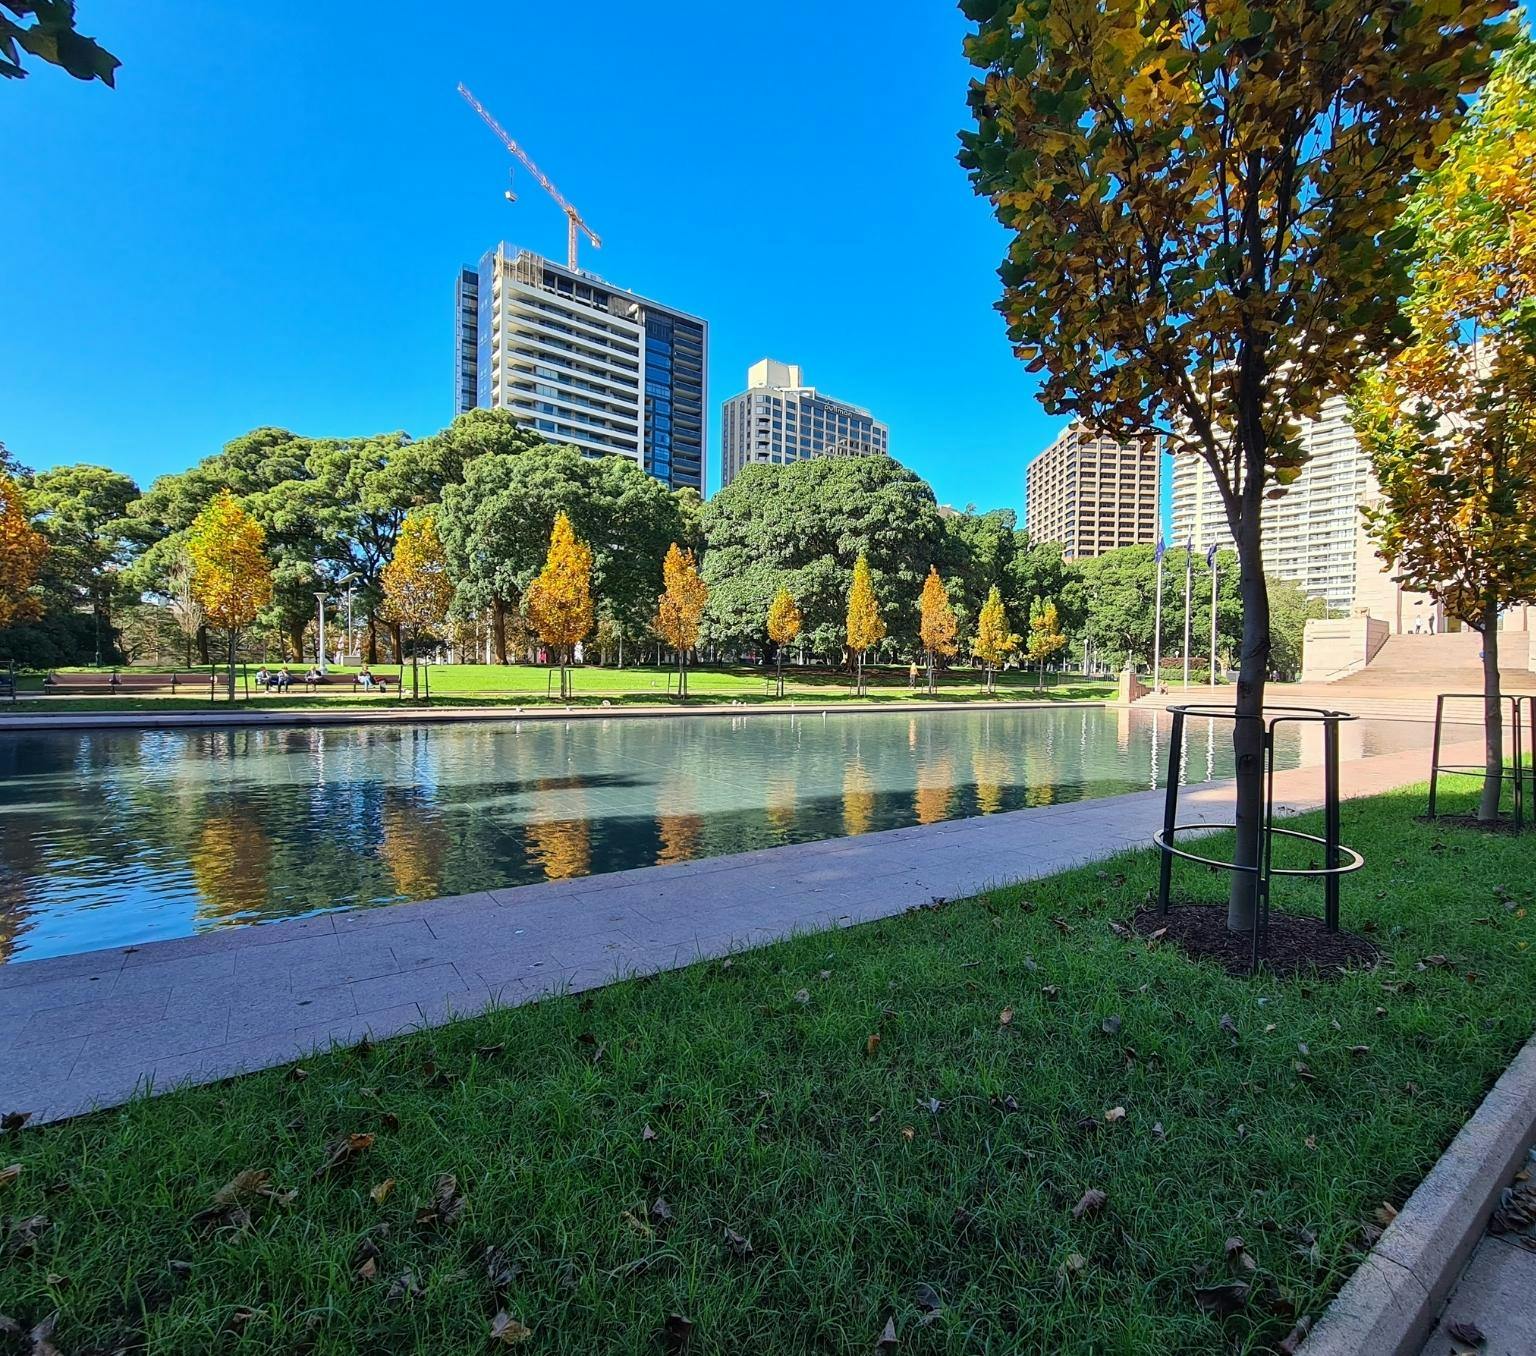 view of a concrete pond set in a park surrounded by office buildings